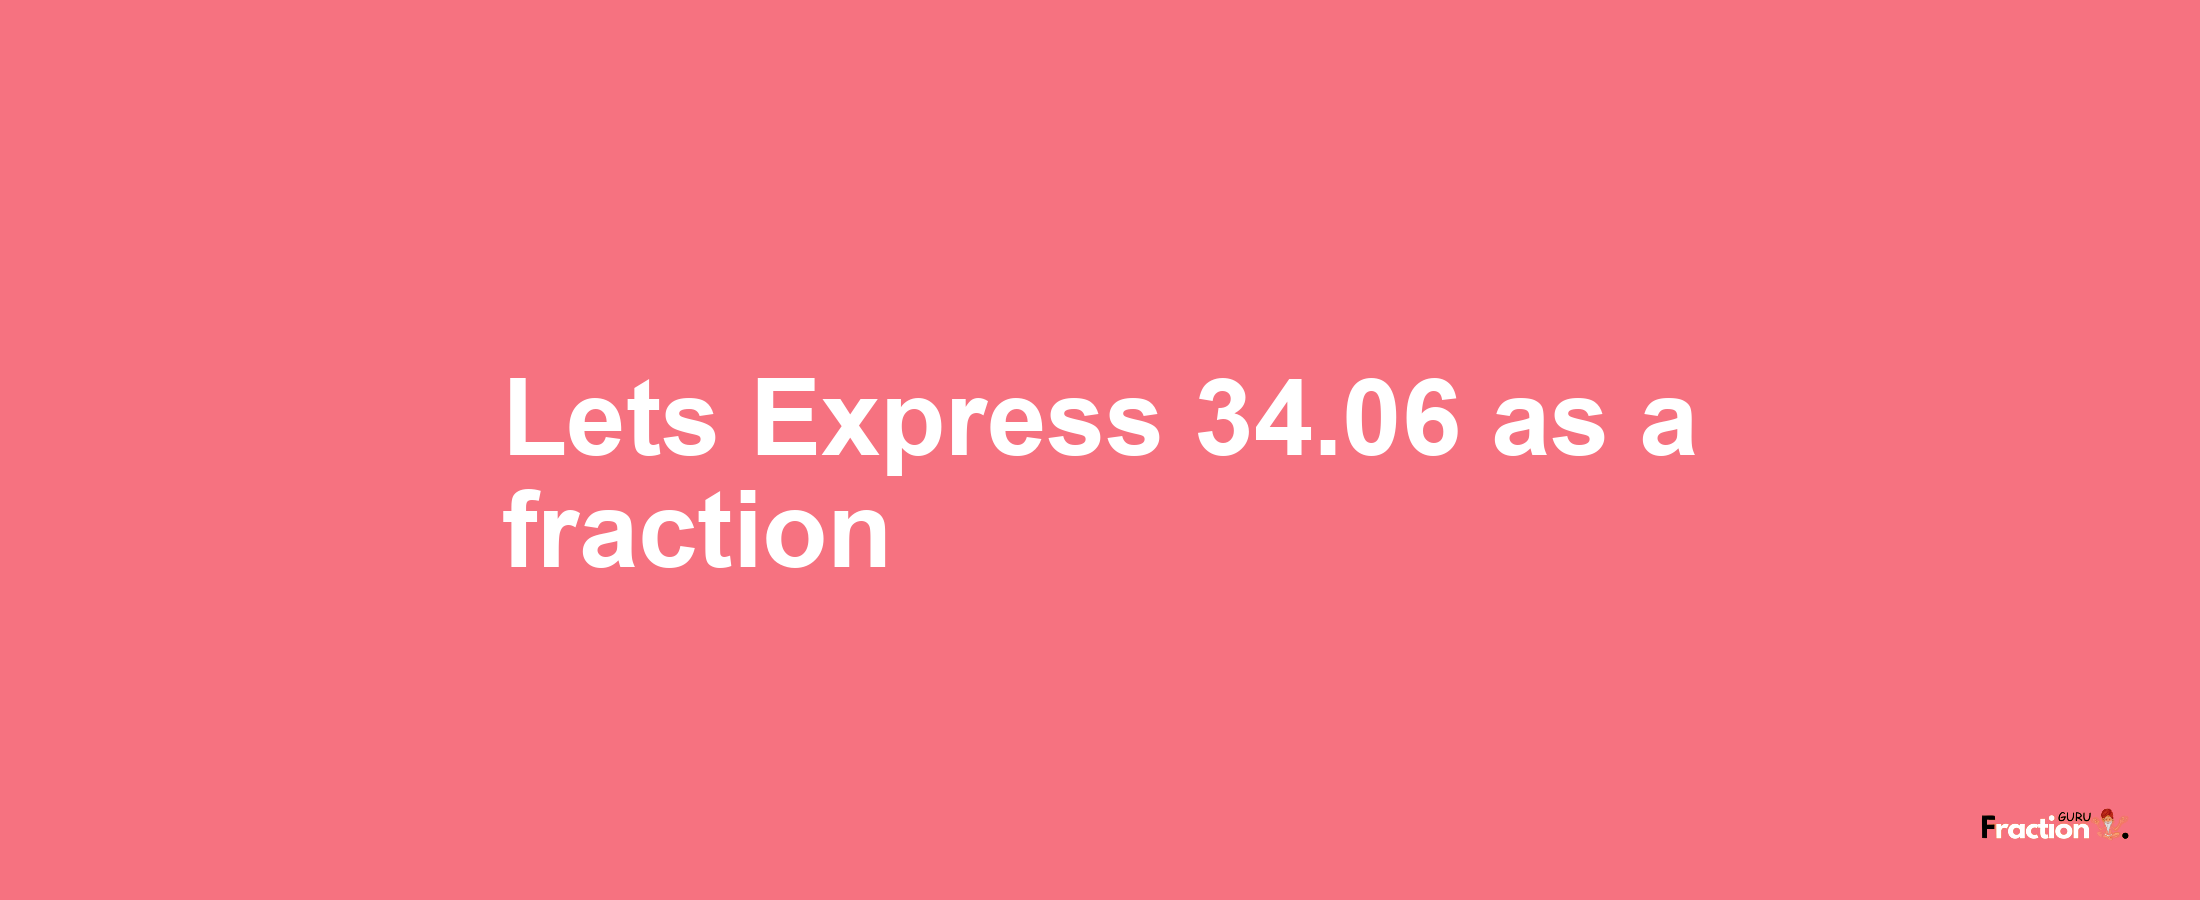 Lets Express 34.06 as afraction